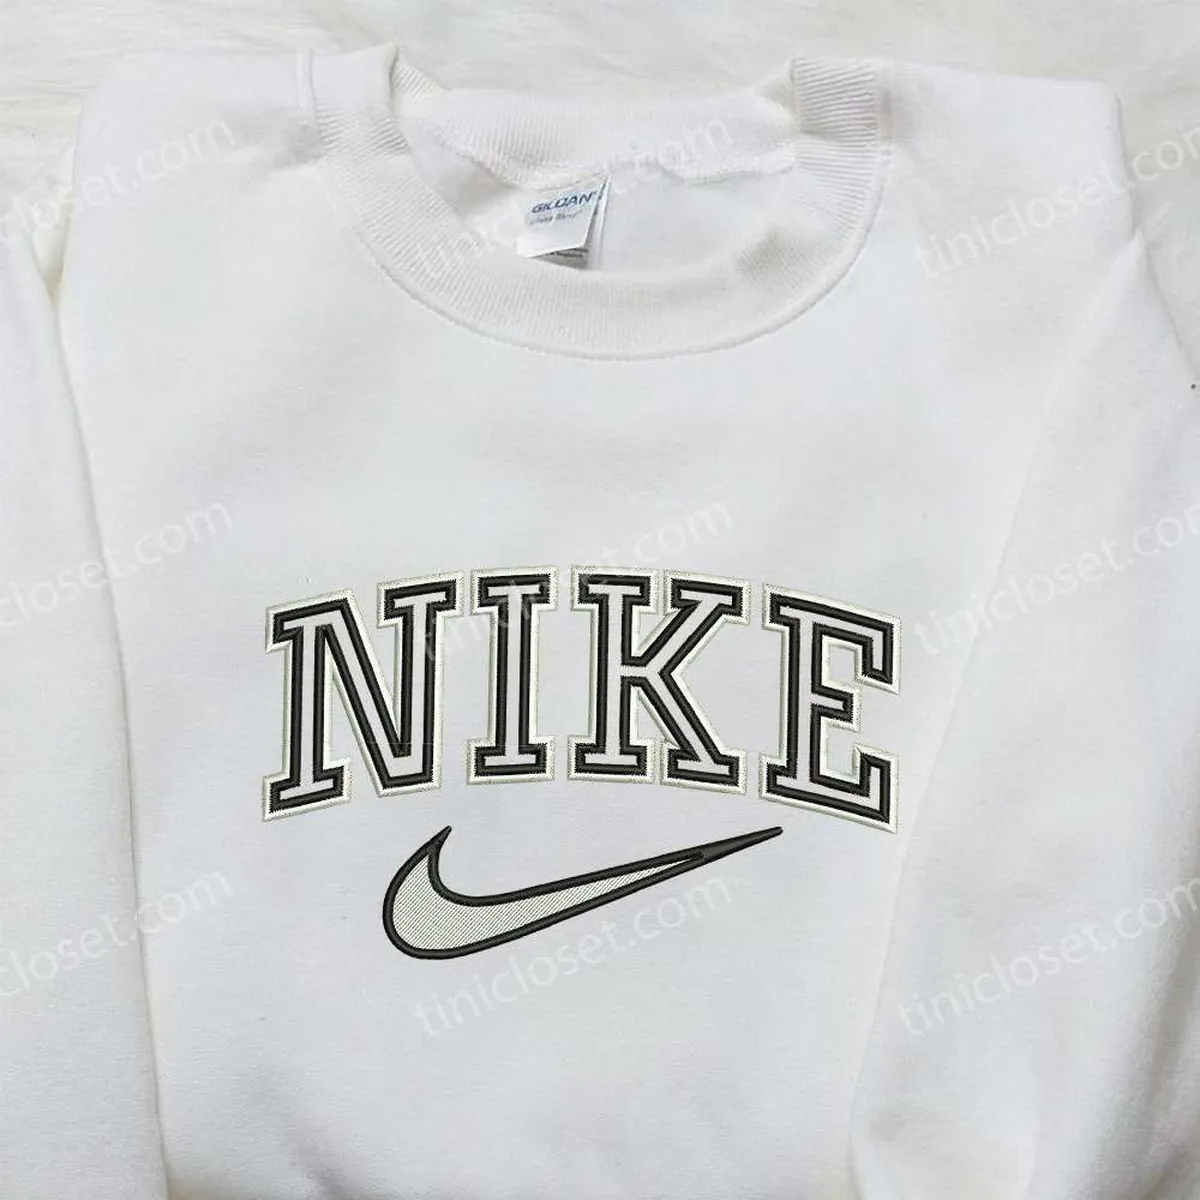 Custom Vintage Nike Embroidered Sweatshirt, Nike Inspired Embroidered Shirt, Best Gift for Family